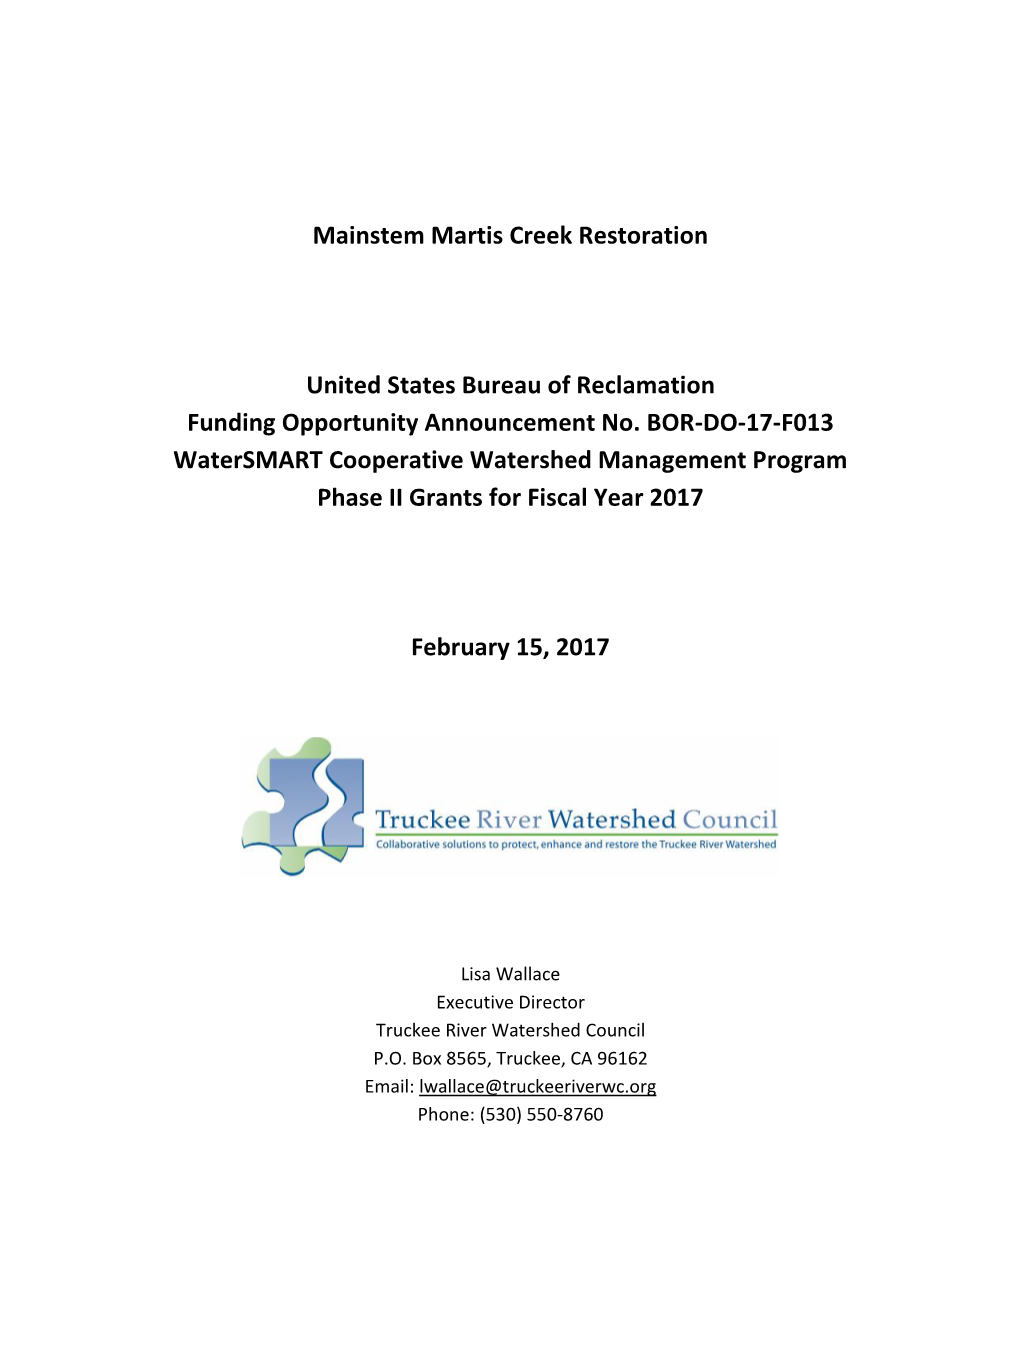 Mainstem Martis Creek Restoration United States Bureau of Reclamation Funding Opportunity Announcement No. BOR-DO-17-F013 Waters